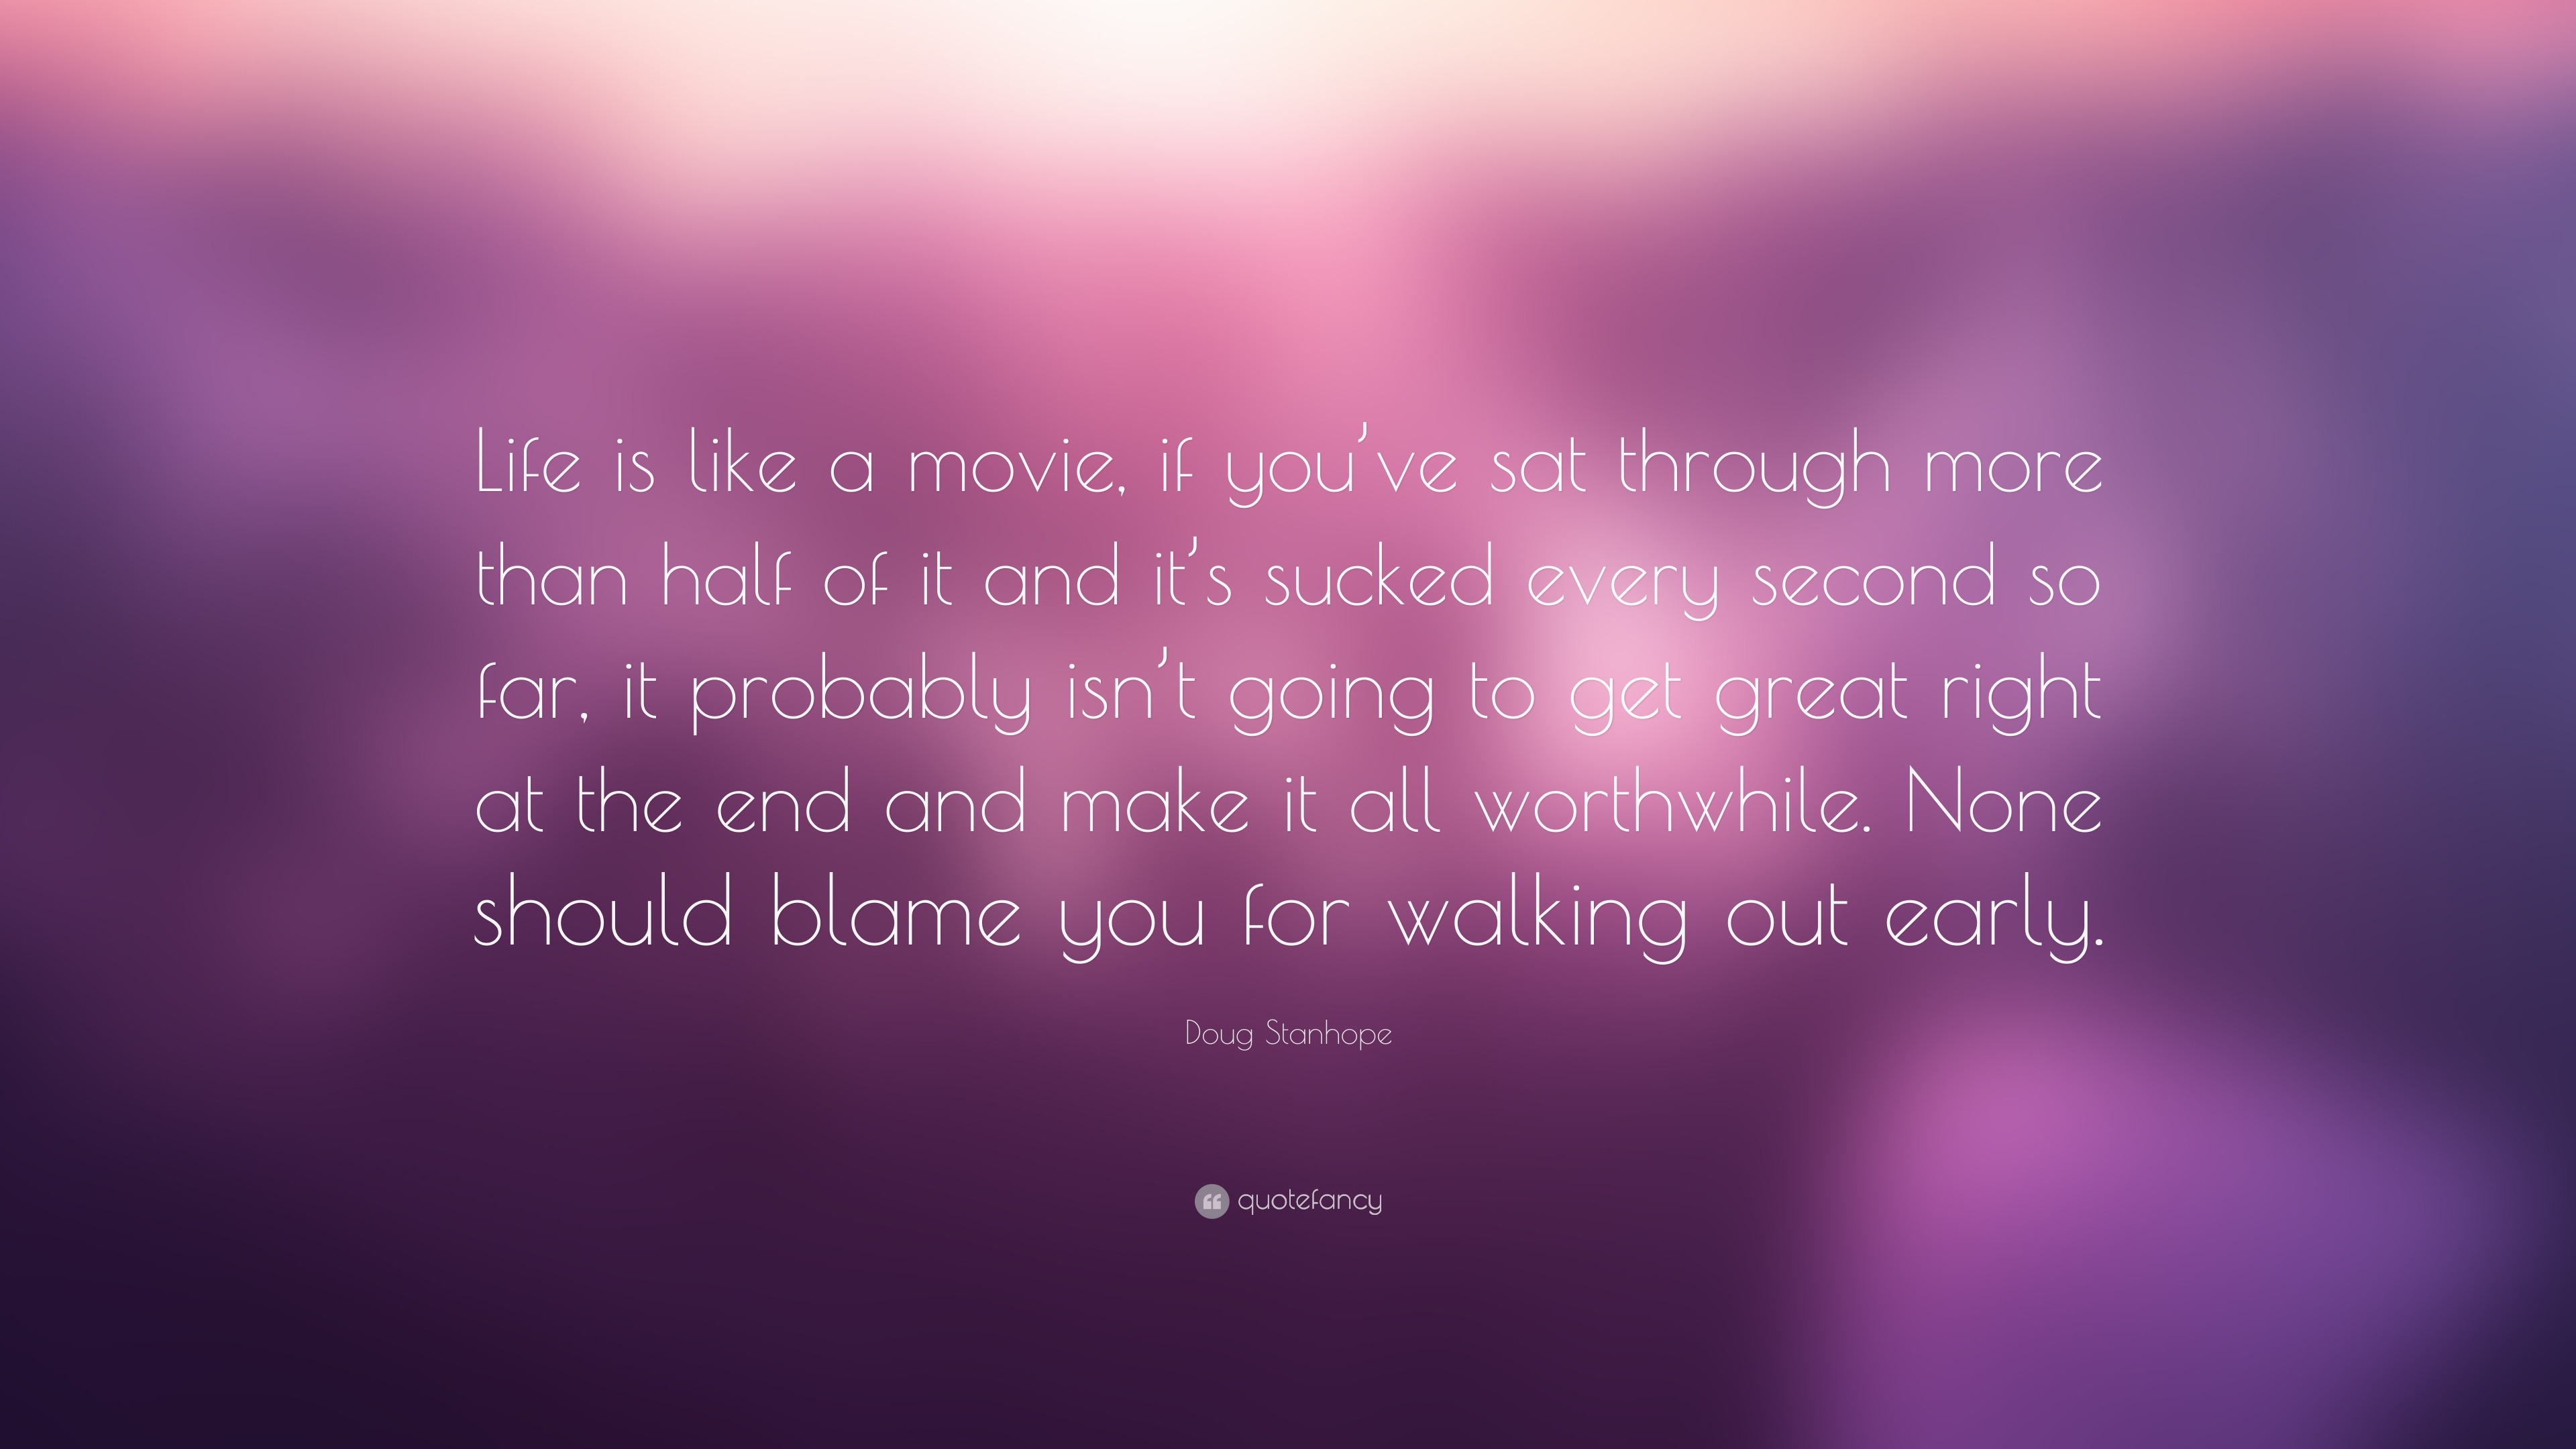 Doug Stanhope Quote: “Life is like a movie, if you’ve sat through more ...